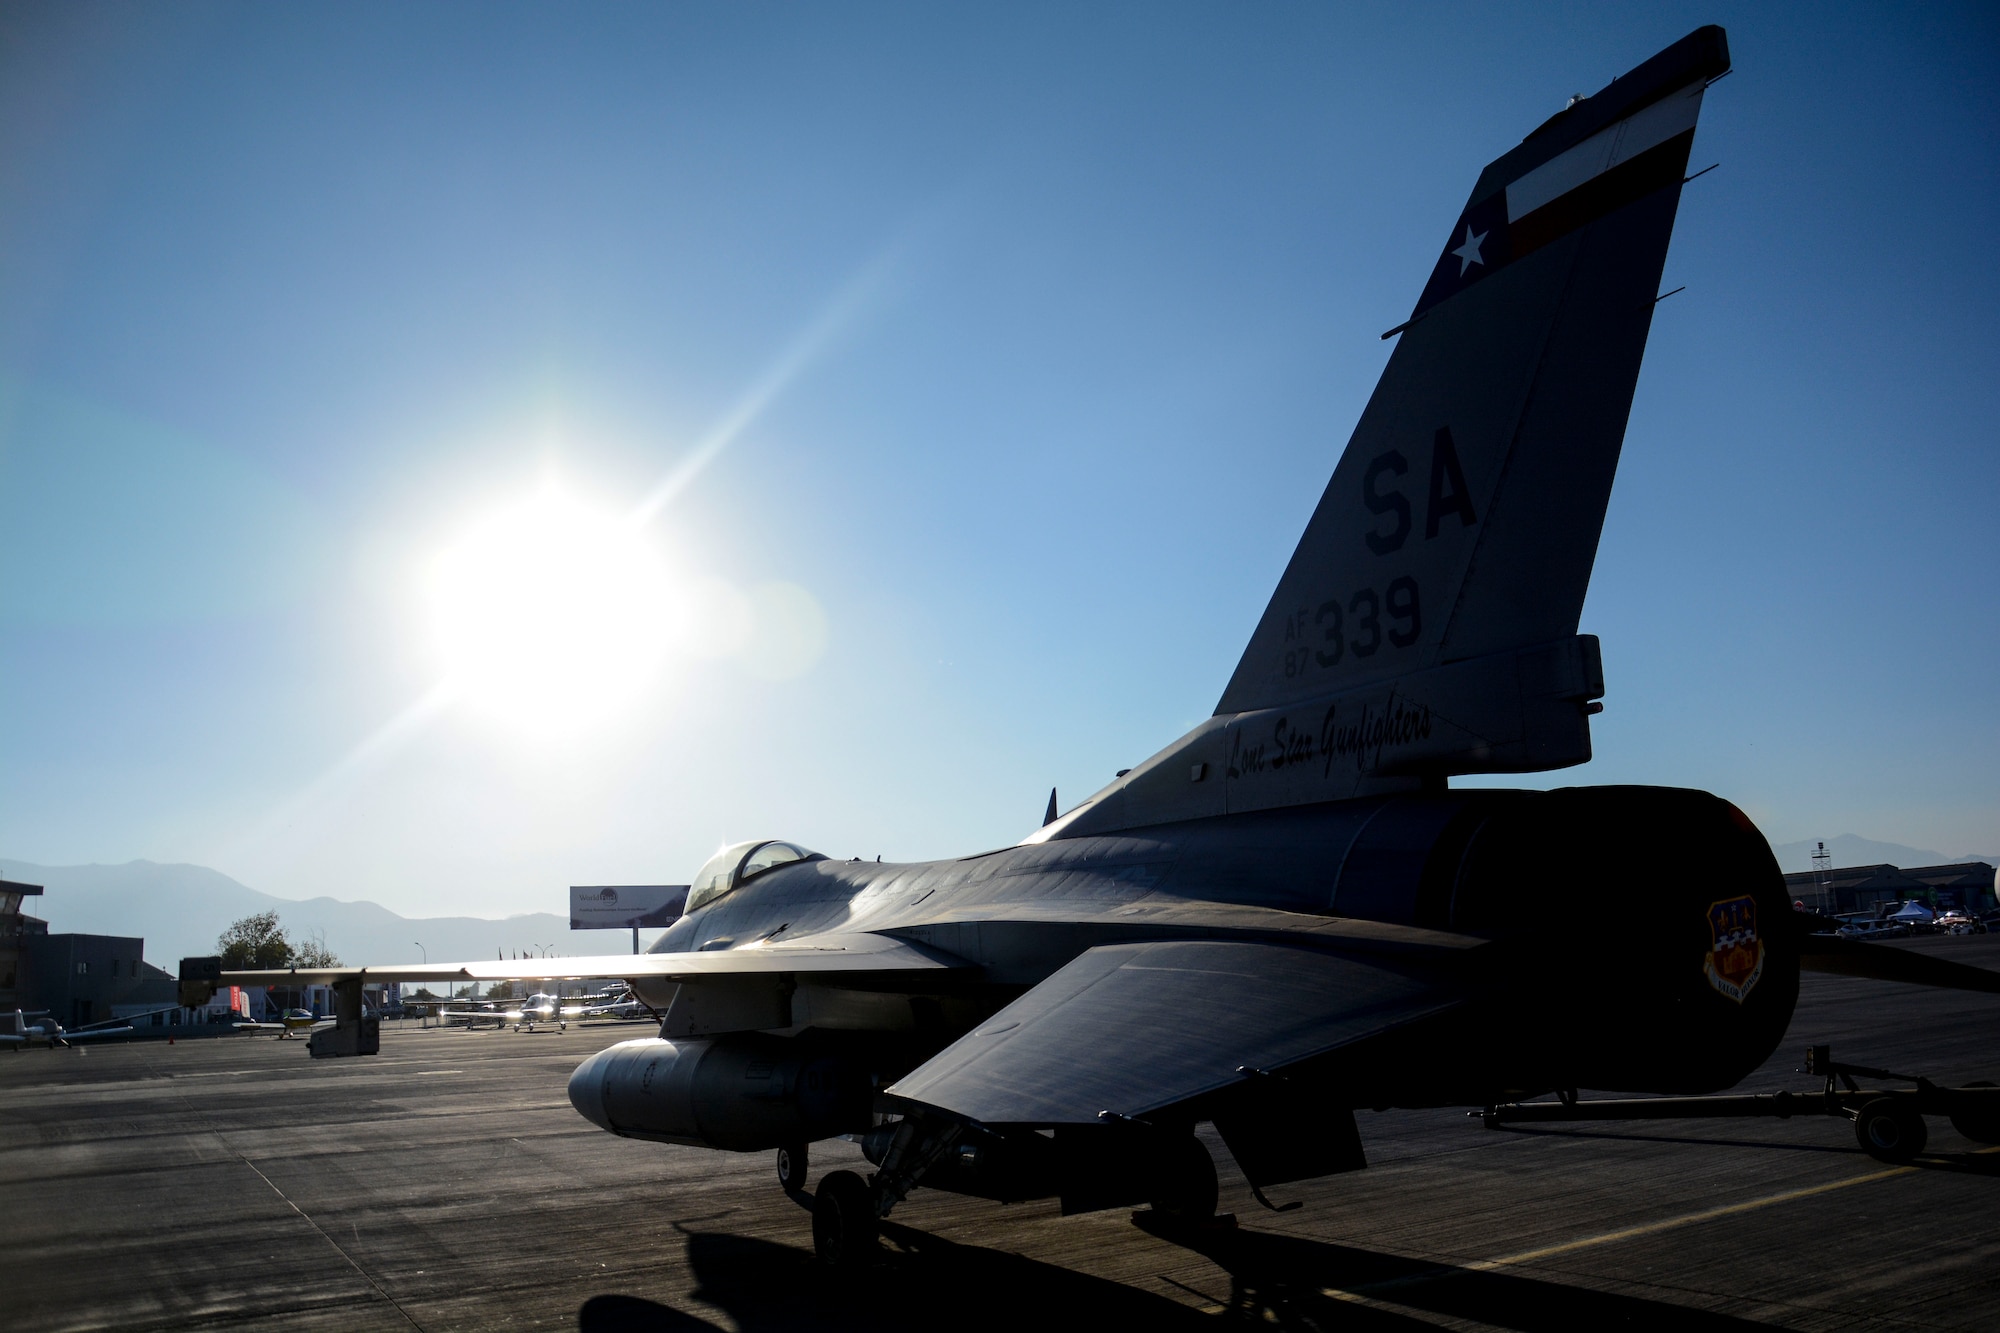 A U.S. Air Force F-16 Fighting Falcon sits on the ramp at the FIDAE airshow in Santiago, Chile, March 24. Nearly 60 U.S. airmen are participating in subject matter expert exchanges with Chilean air force counterparts during the week of FIDAE, and as part of the events will host static displays of the C-130 Hercules and F-16 Fighting Falcon during the FIDAE Air Show in Santiago, March 25 through 30. The exchanges, conducted regularly throughout the year, involve U.S. Airmen sharing best practices and procedures to build partnerships and promote interoperability with partner-nations throughout South America, Central America and the Caribbean. (U.S. Air Force photo by Capt. Justin Brockhoff/Released)